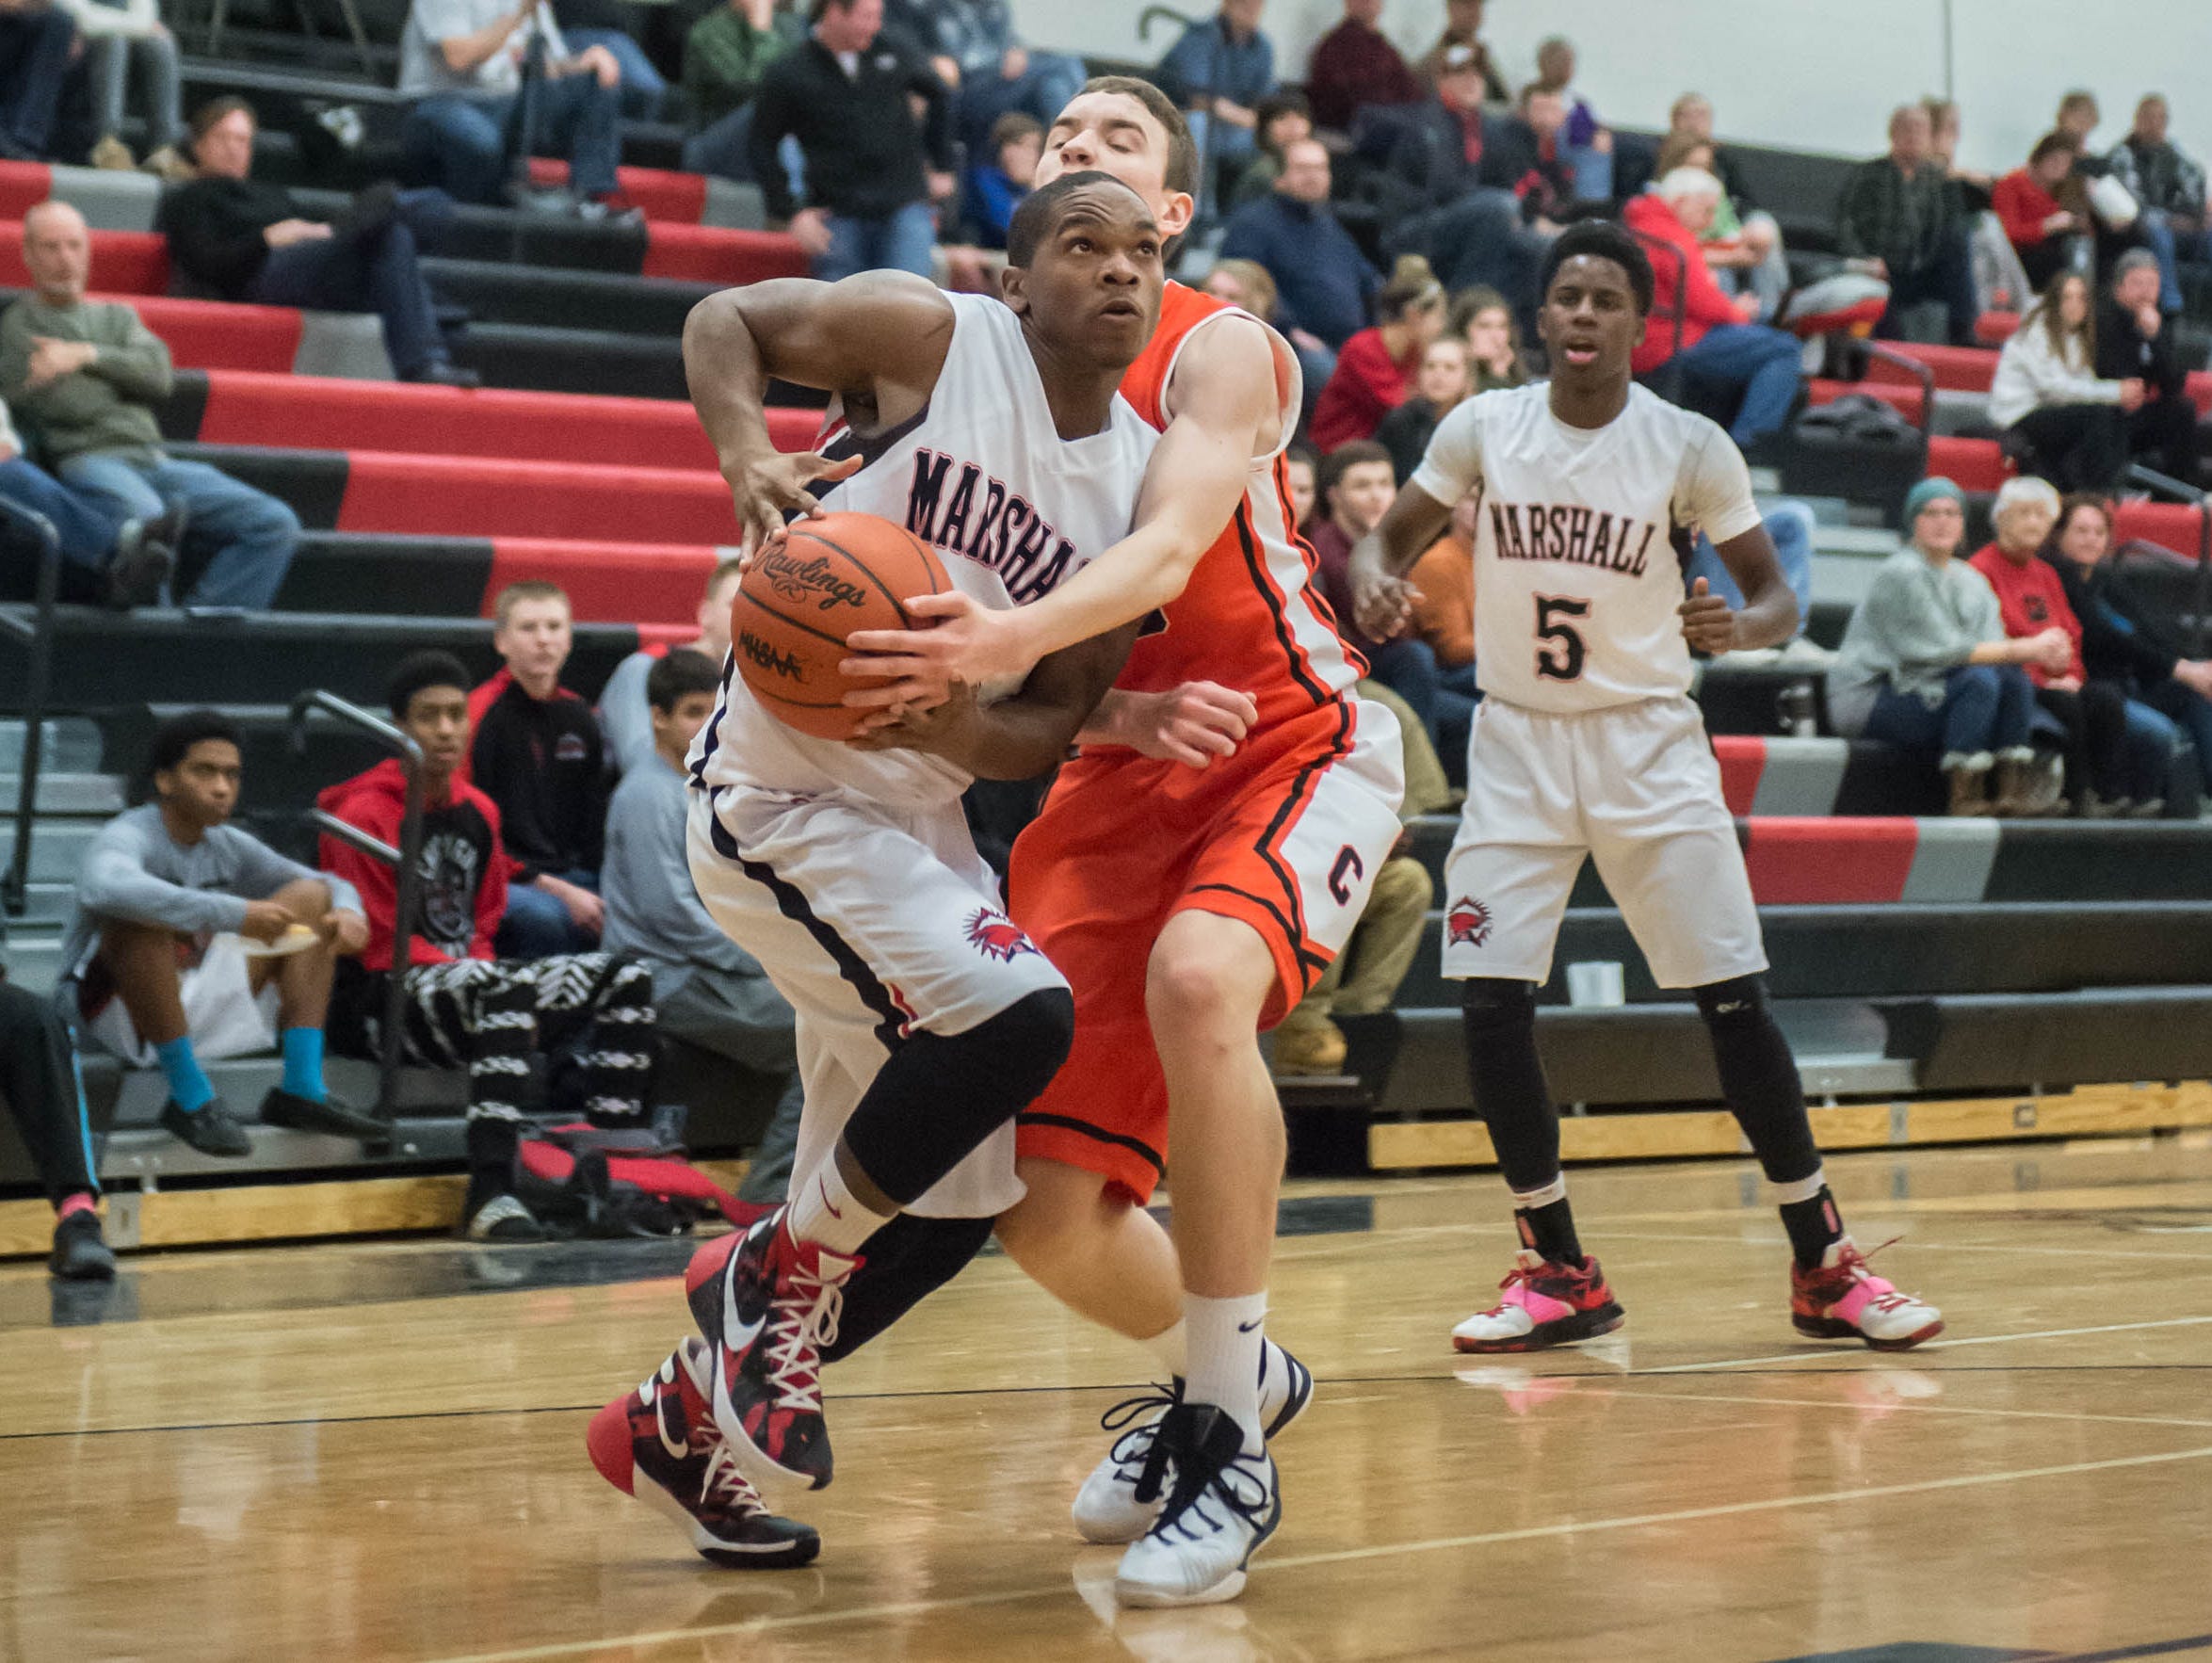 Marshall's Forrest Jackson drives to the hoop against Chatlotte in Tuesday evening's game.